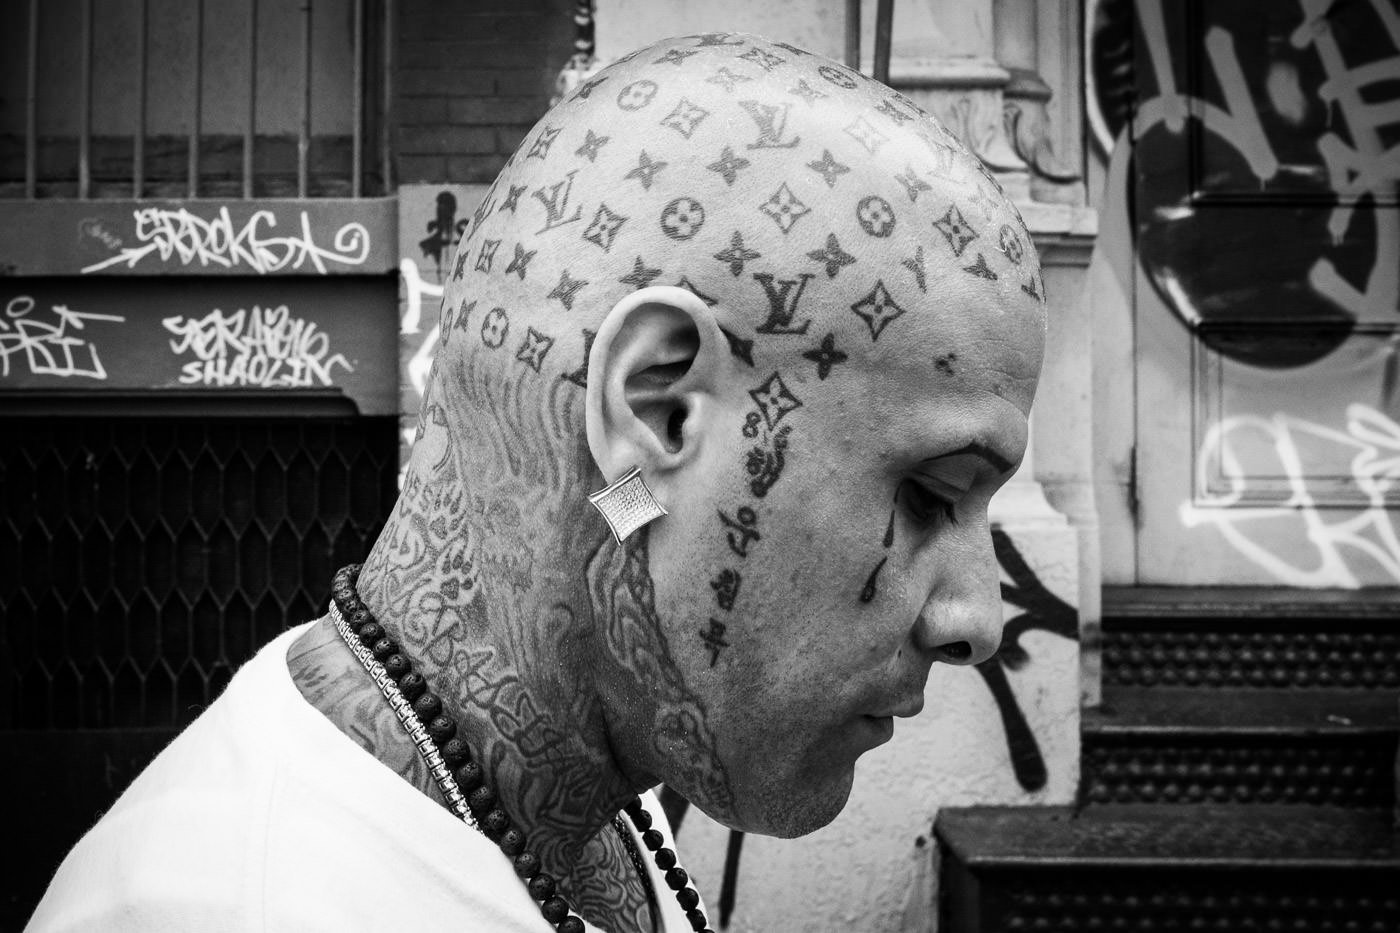 Street photography: portrait of man in profile showing elaborate head tattoos